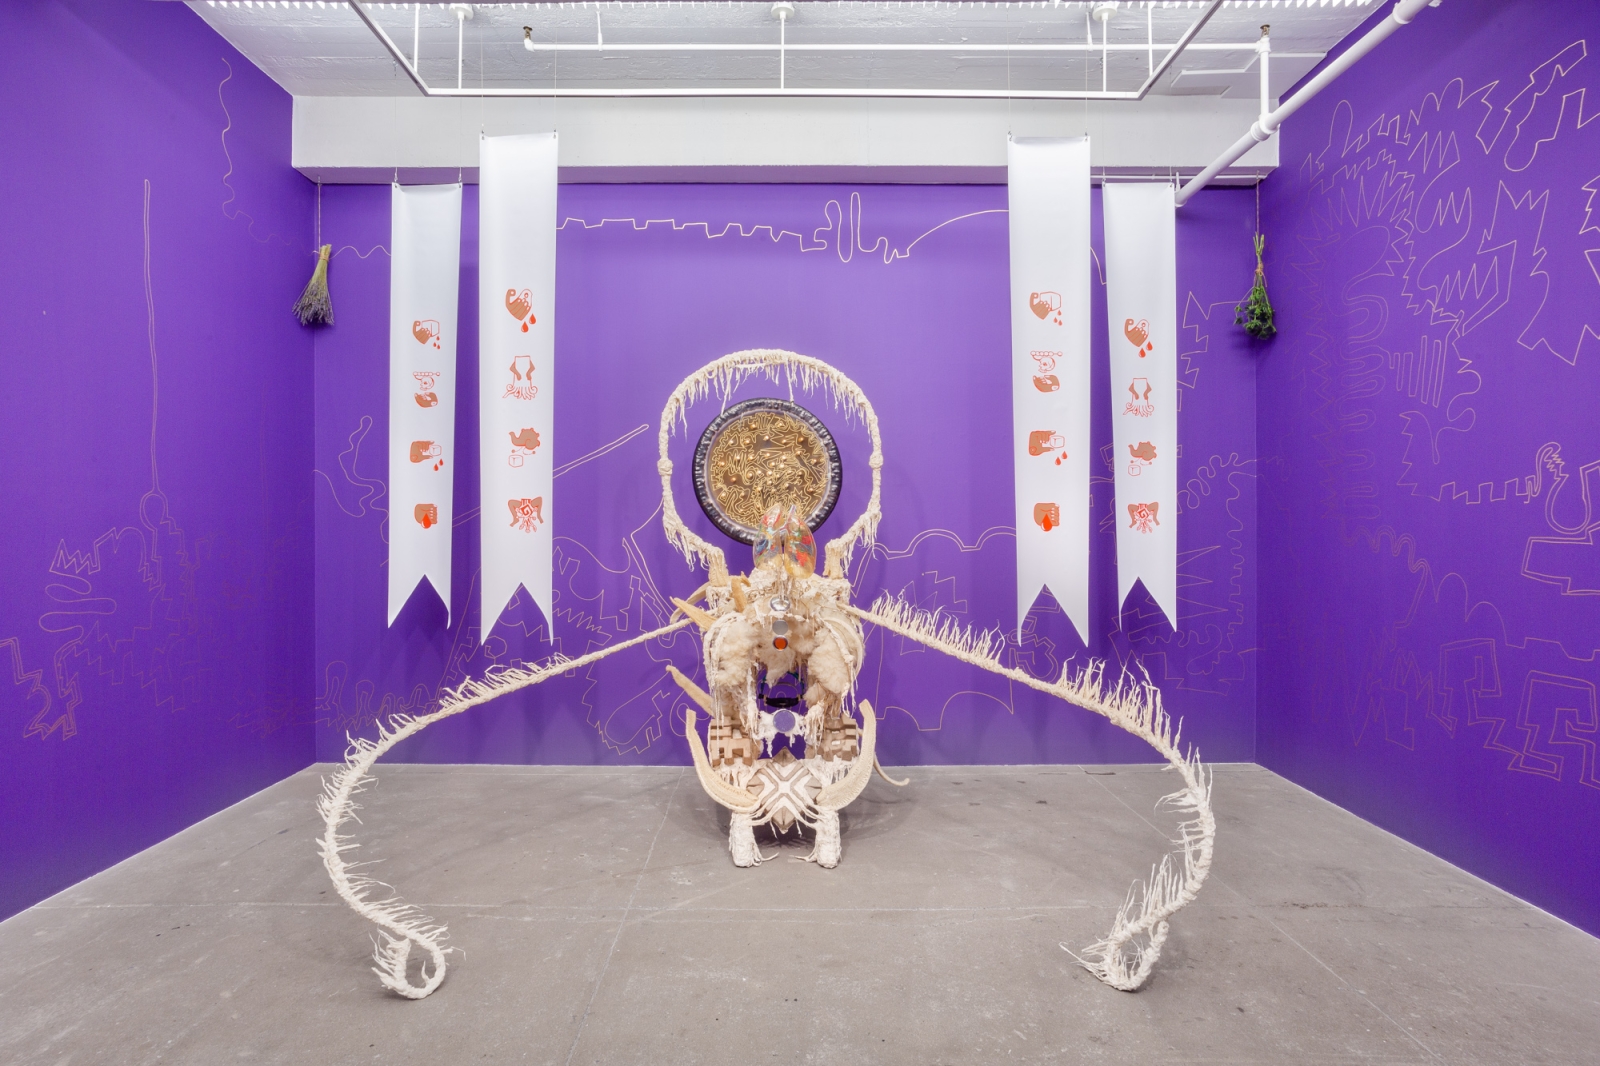 Guadalupe Maravilla
Disease Thrower #4, 2019 (installation view)
gong, steel, wood, cotton, glue mixture, plastic, loofah, and objects collected from a ritual of retracing the artist&amp;#39;s original migration route
96 x 57 x 63 ins.
243.8 x 144.8 x 160 cm